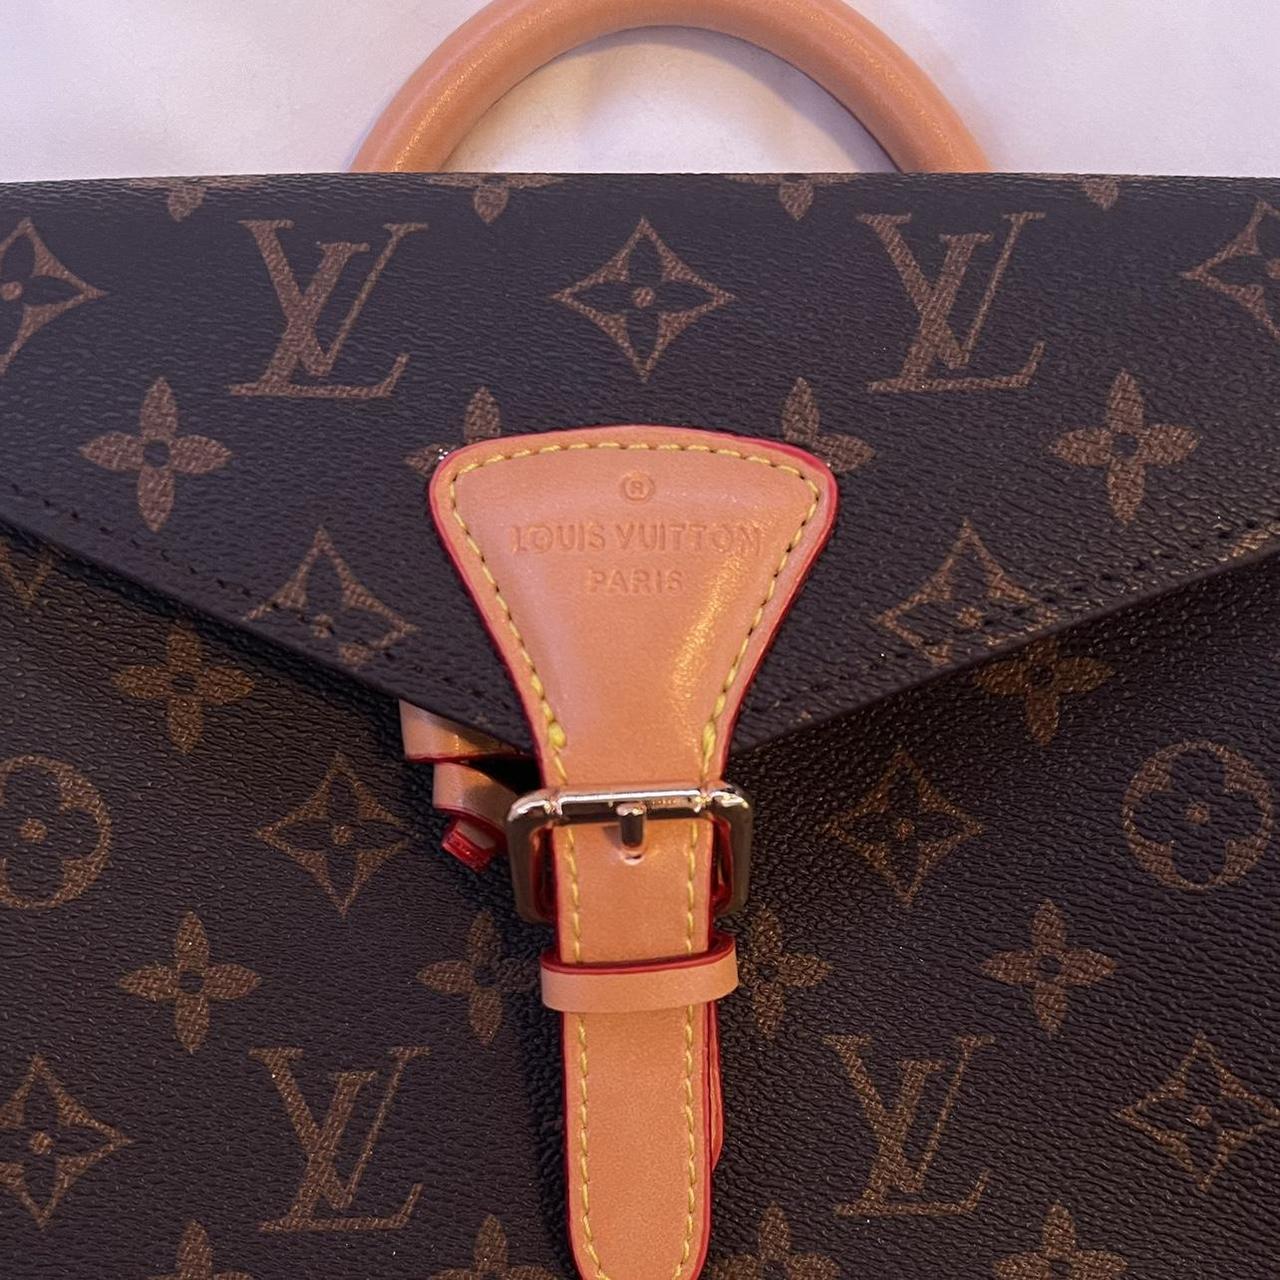 LV Monogram Bag, Bought from Fashionphile. Used- - Depop